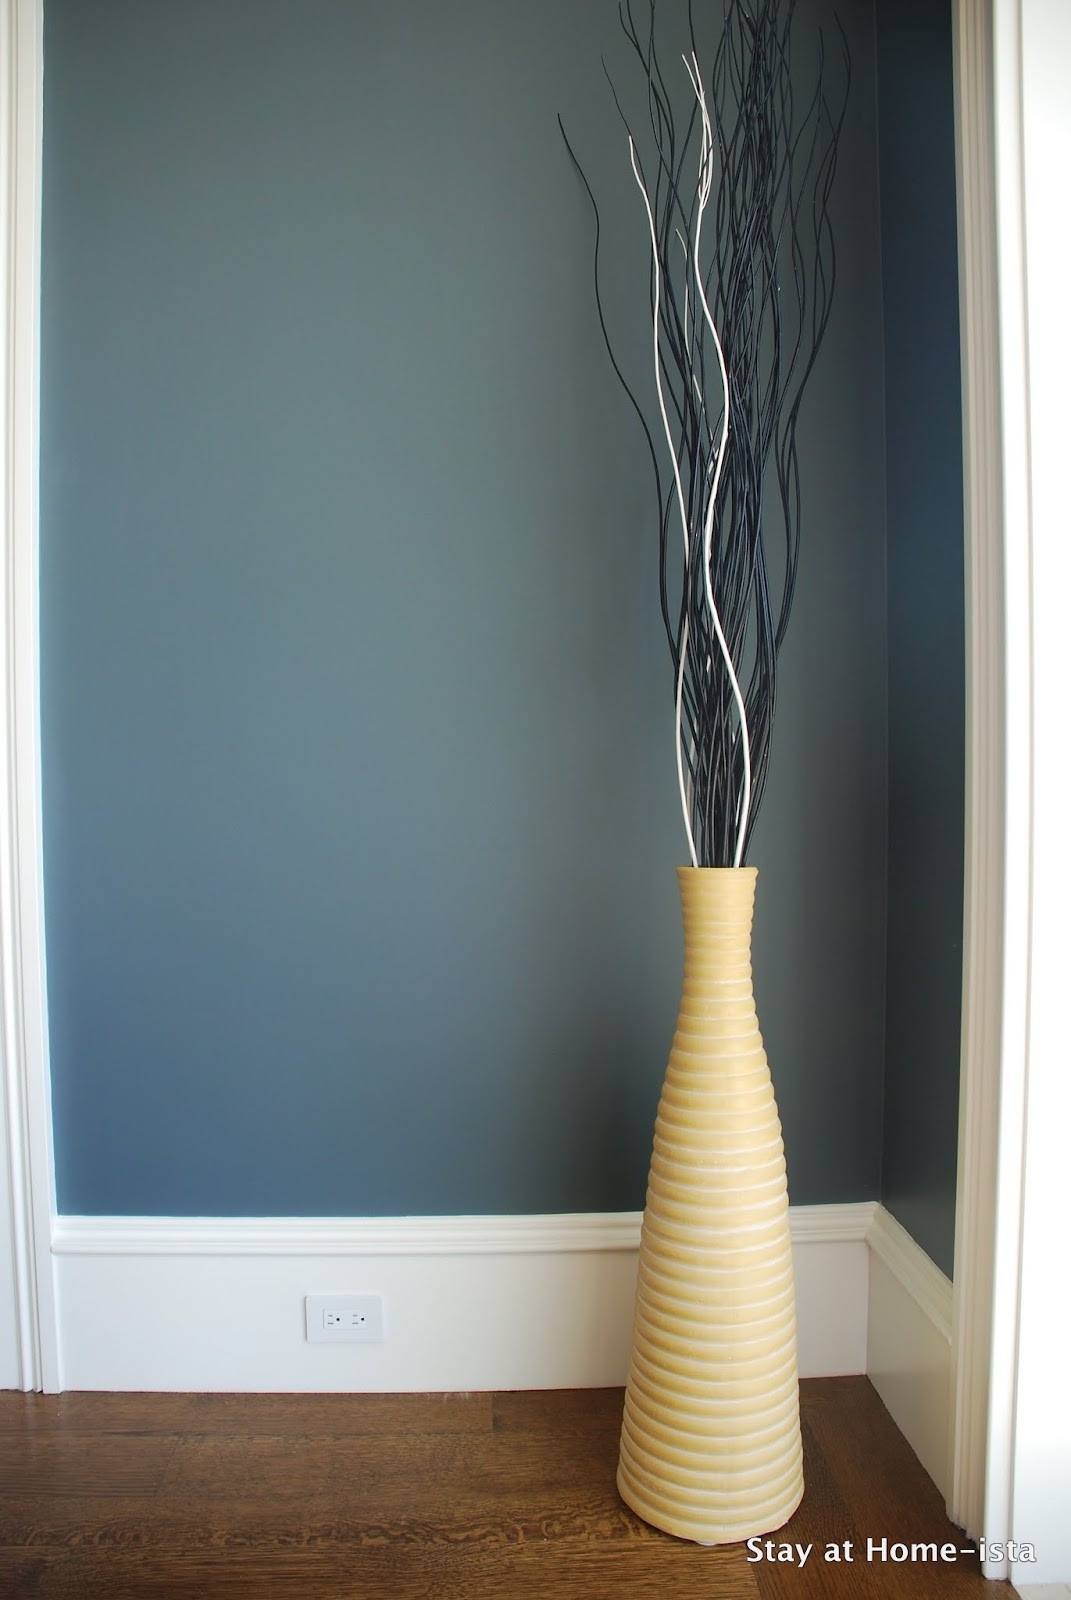 26 Stylish Floor Vase with Branches 2024 free download floor vase with branches of floor vase branches photograph ikea interior design best pe s5h intended for floor vase branches photograph ikea interior design best pe s5h vases ikea floor vase